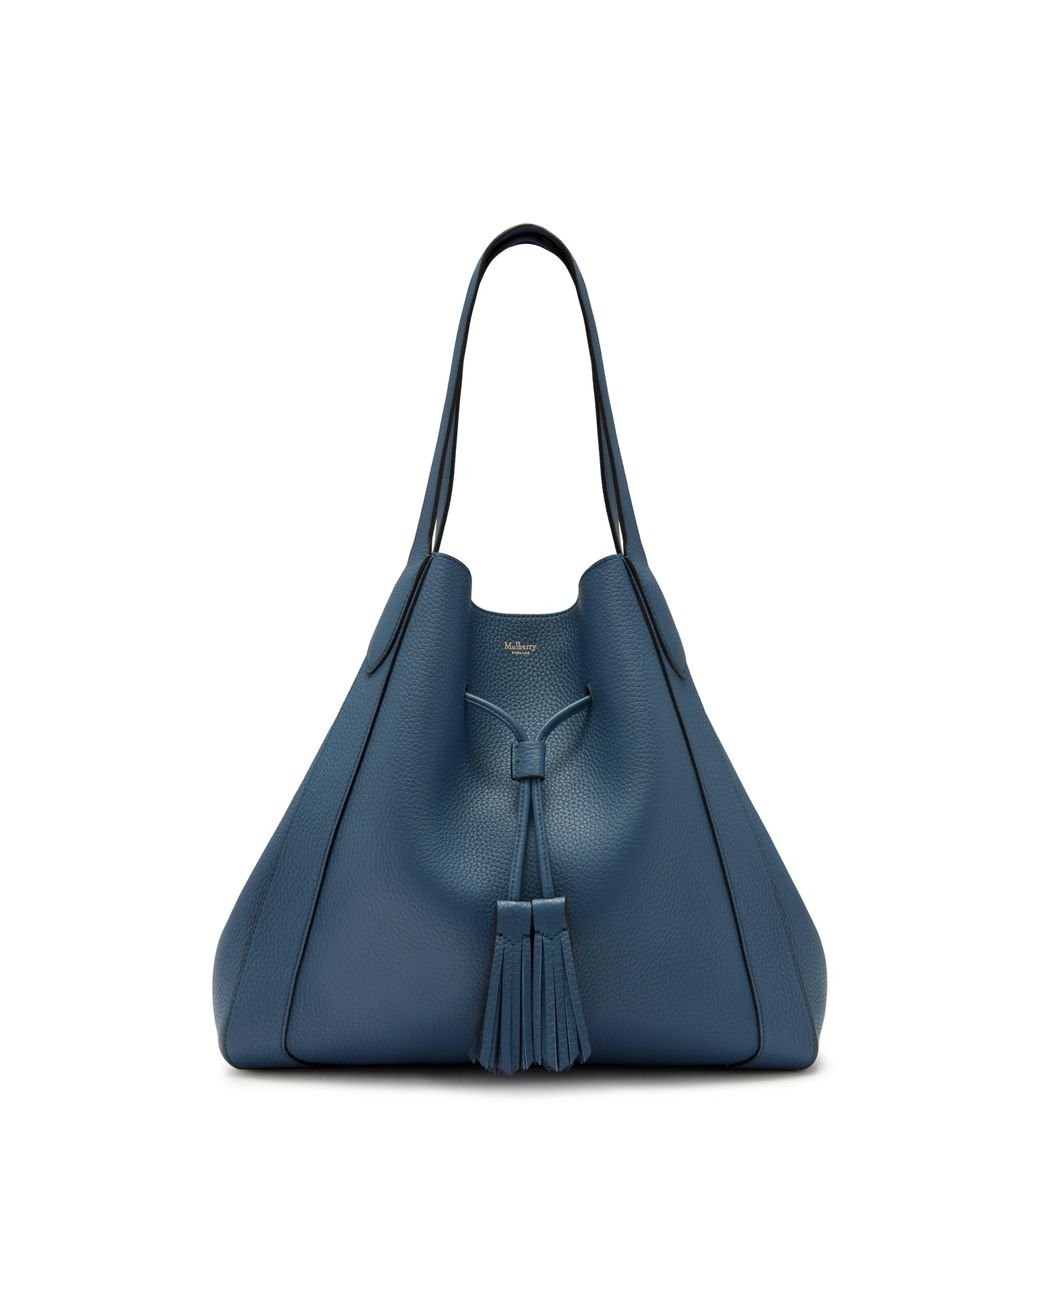 Mulberry Millie Drawstring Tote Bag in Blue | Lyst